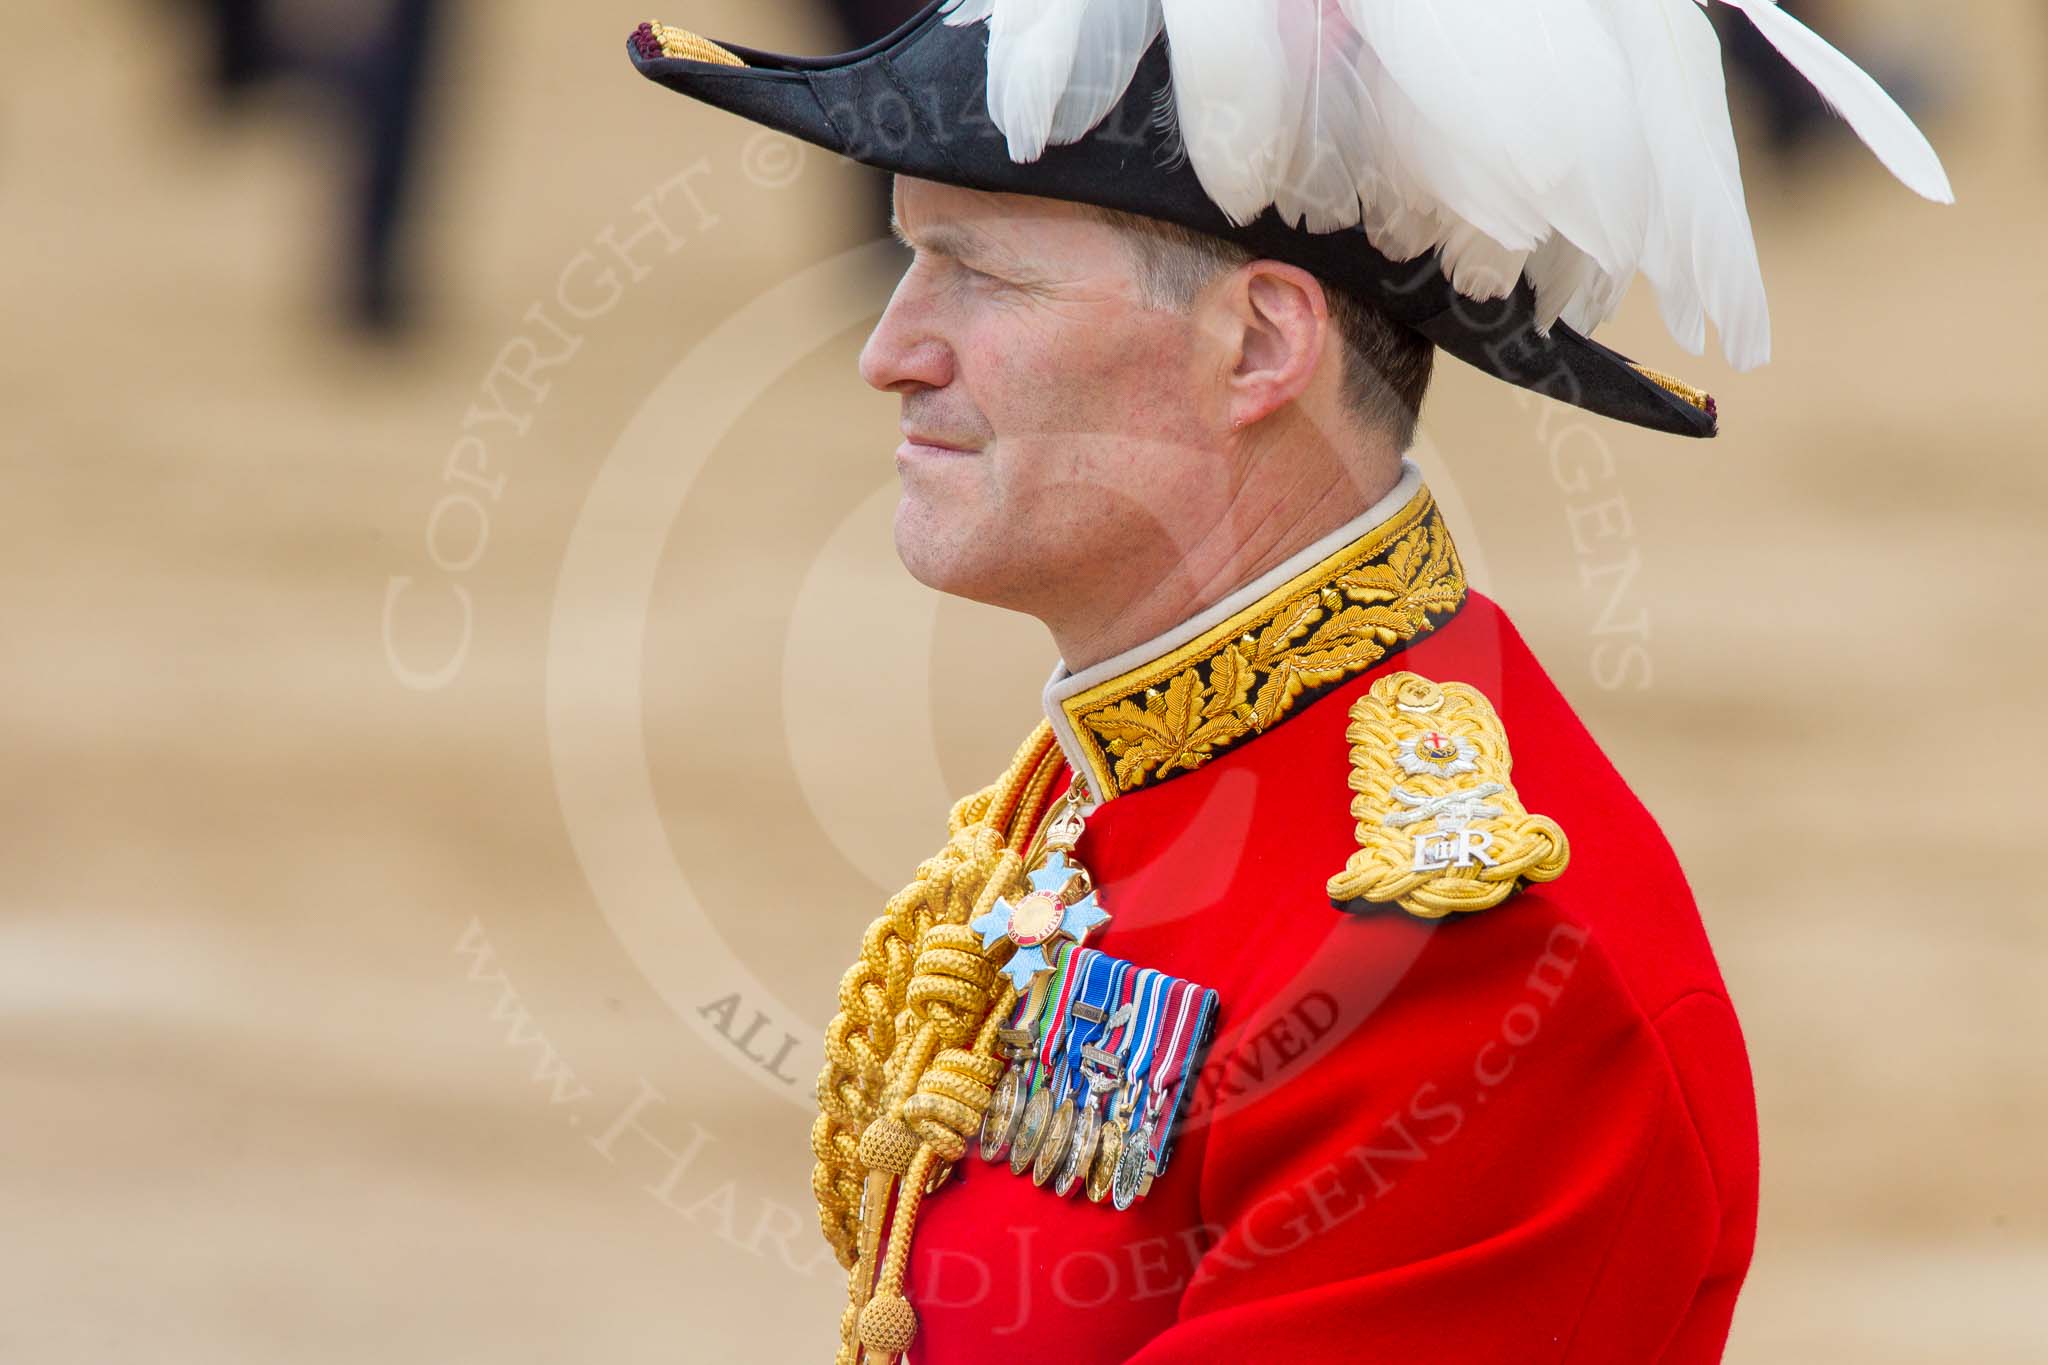 Trooping the Colour 2014.
Horse Guards Parade, Westminster,
London SW1A,

United Kingdom,
on 14 June 2014 at 12:13, image #900